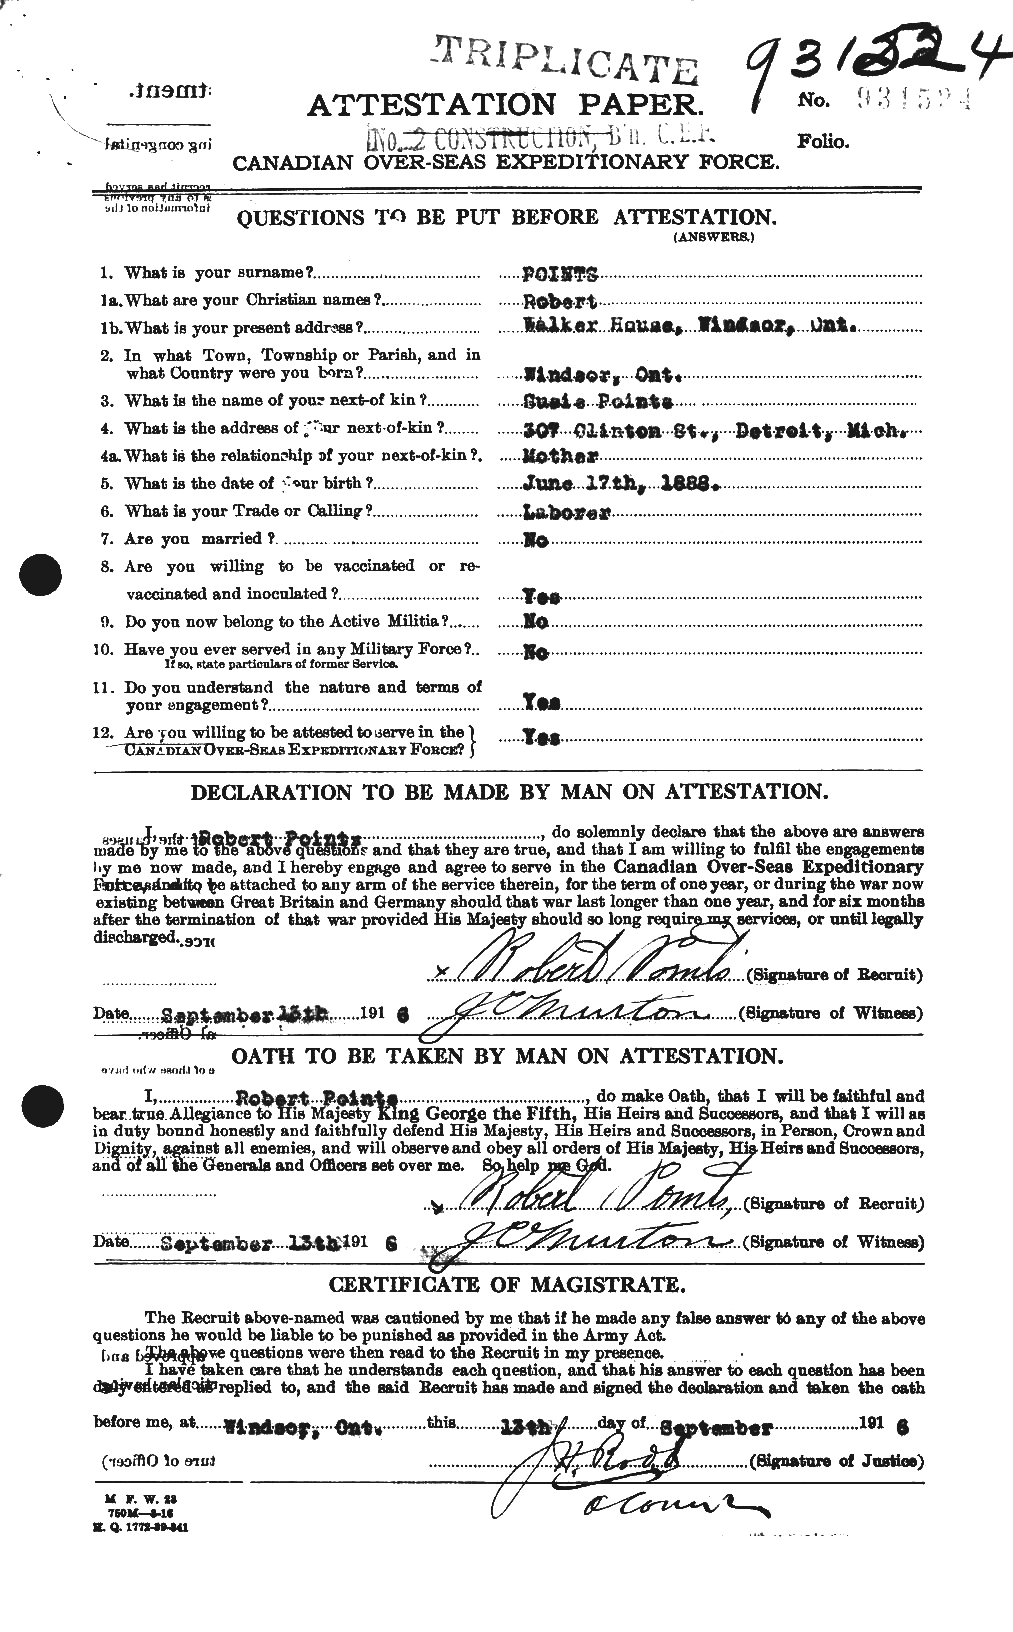 Personnel Records of the First World War - CEF 579307a